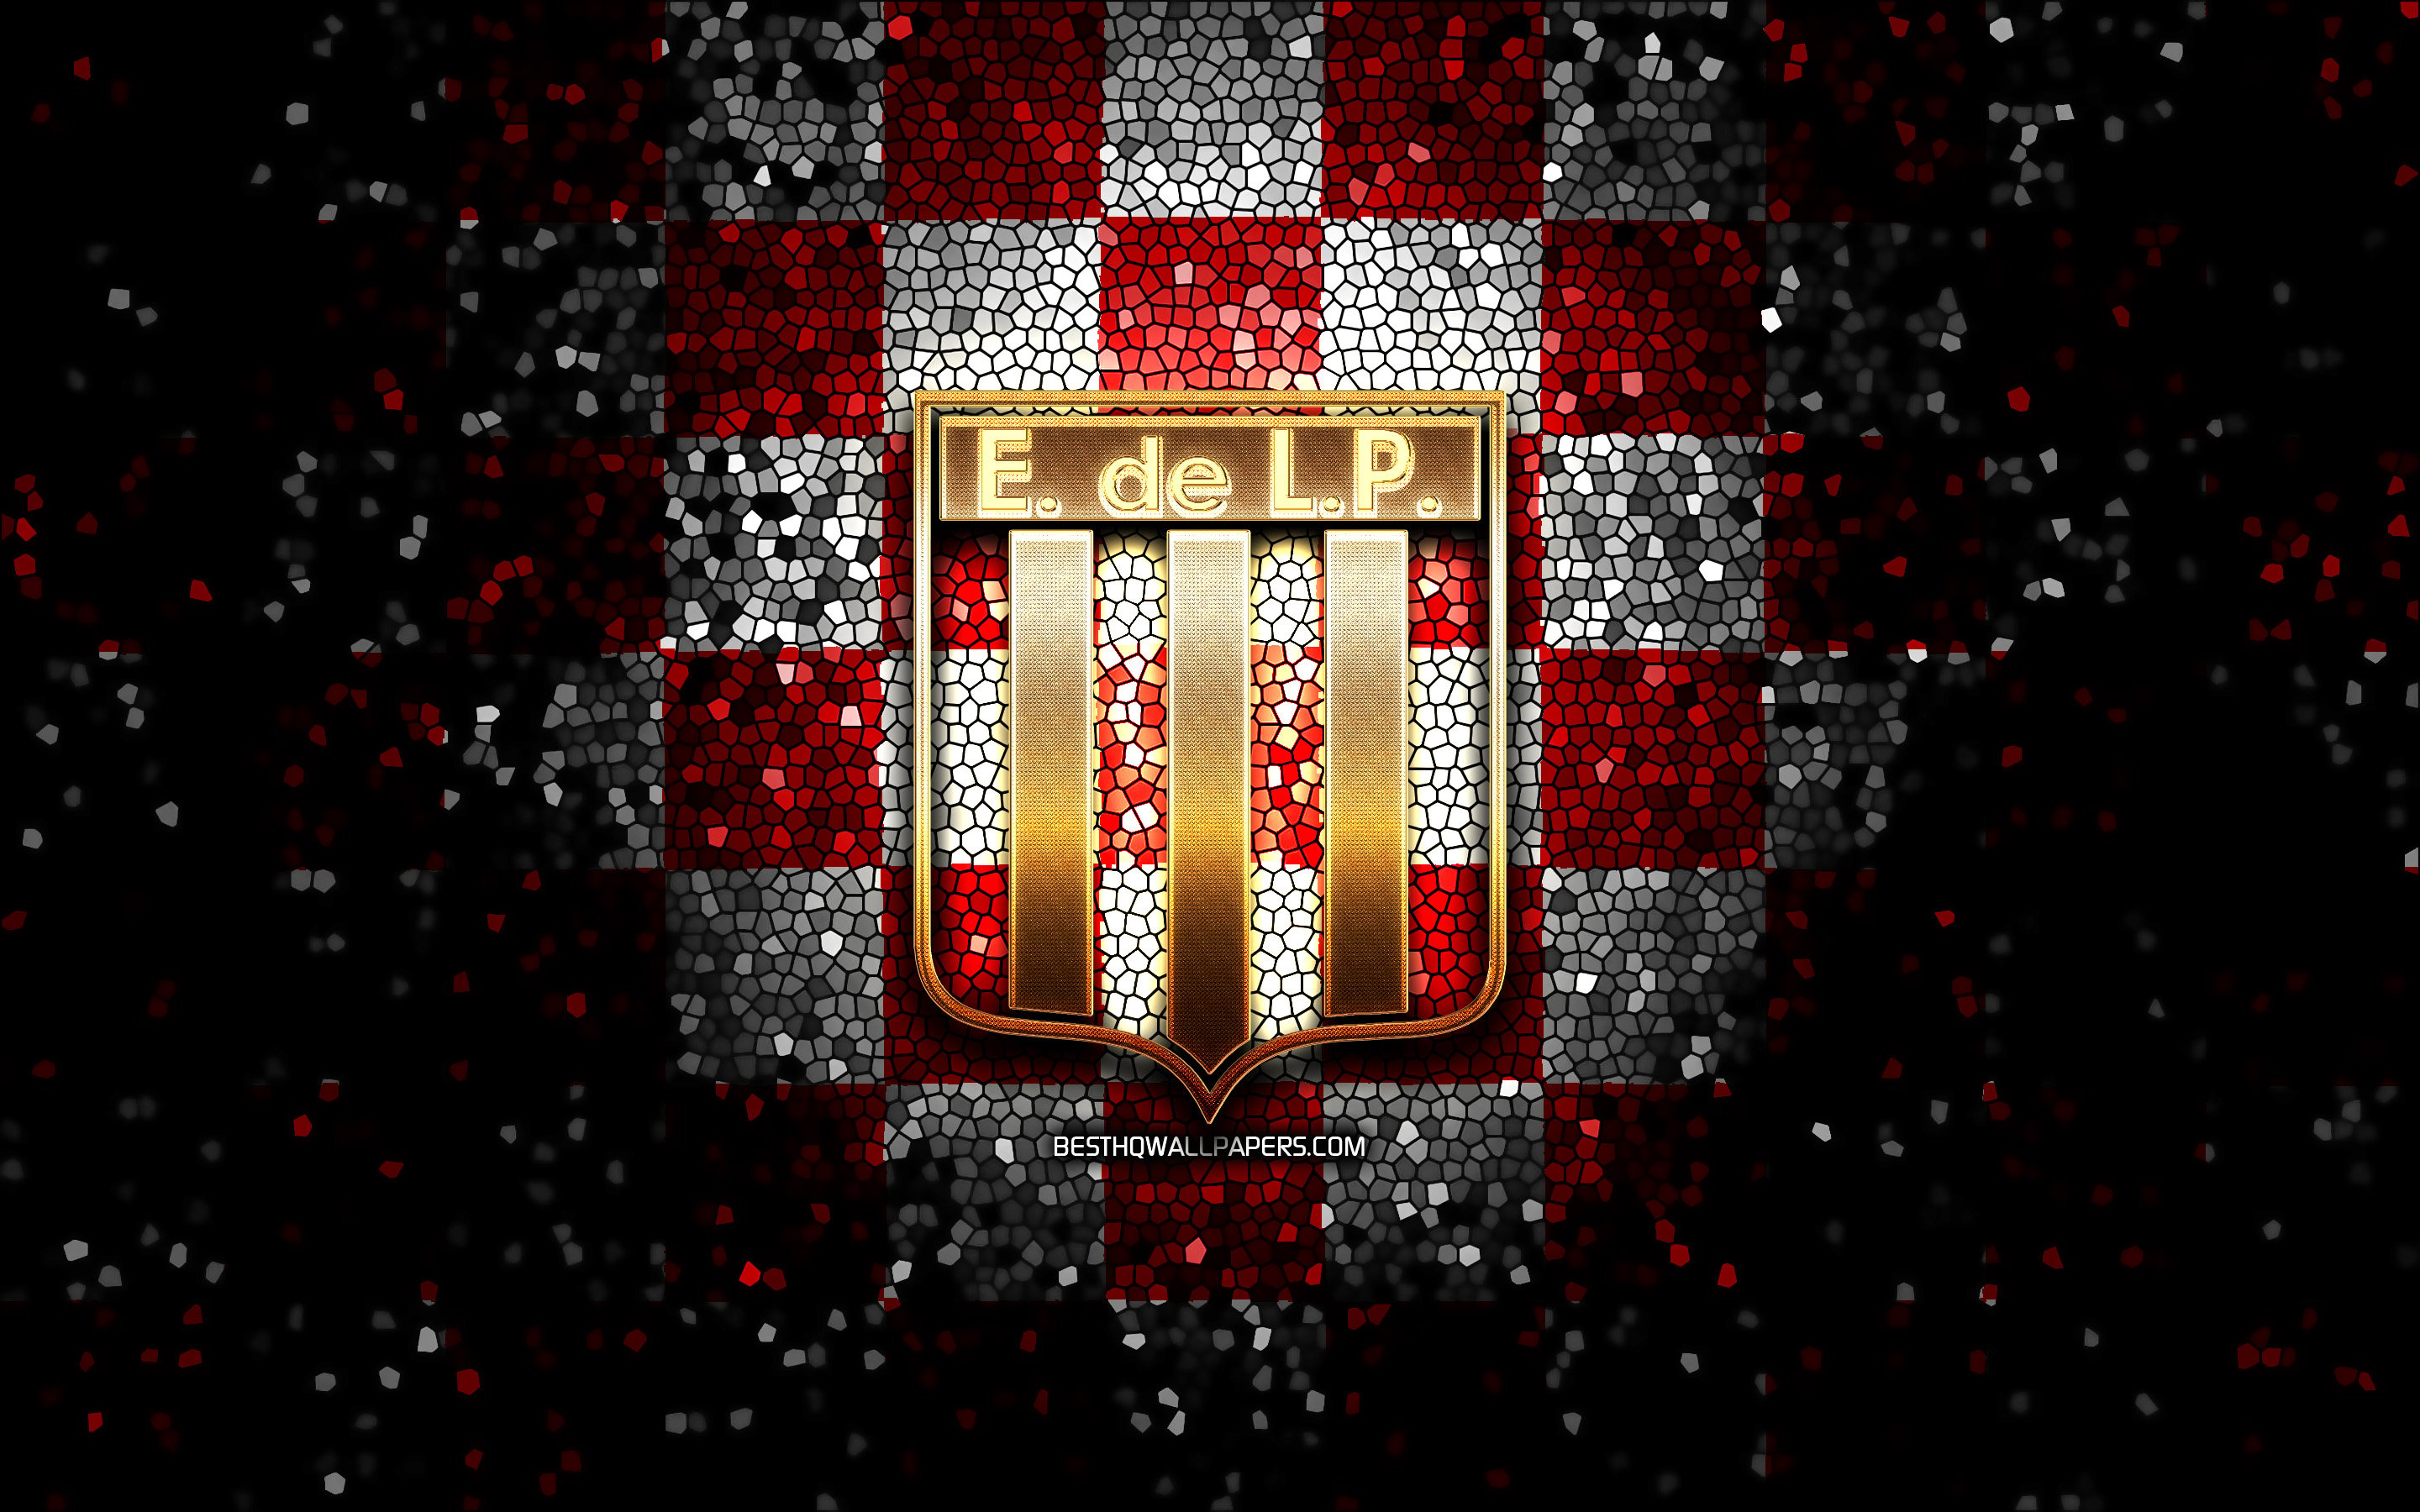 Download wallpaper Estudiantes FC, glitter logo, Argentine Primera Division, red white checkered background, soccer, argentinian football club, Estudiantes de La Plata logo, mosaic art, football, Club Estudiantes de La Plata for desktop